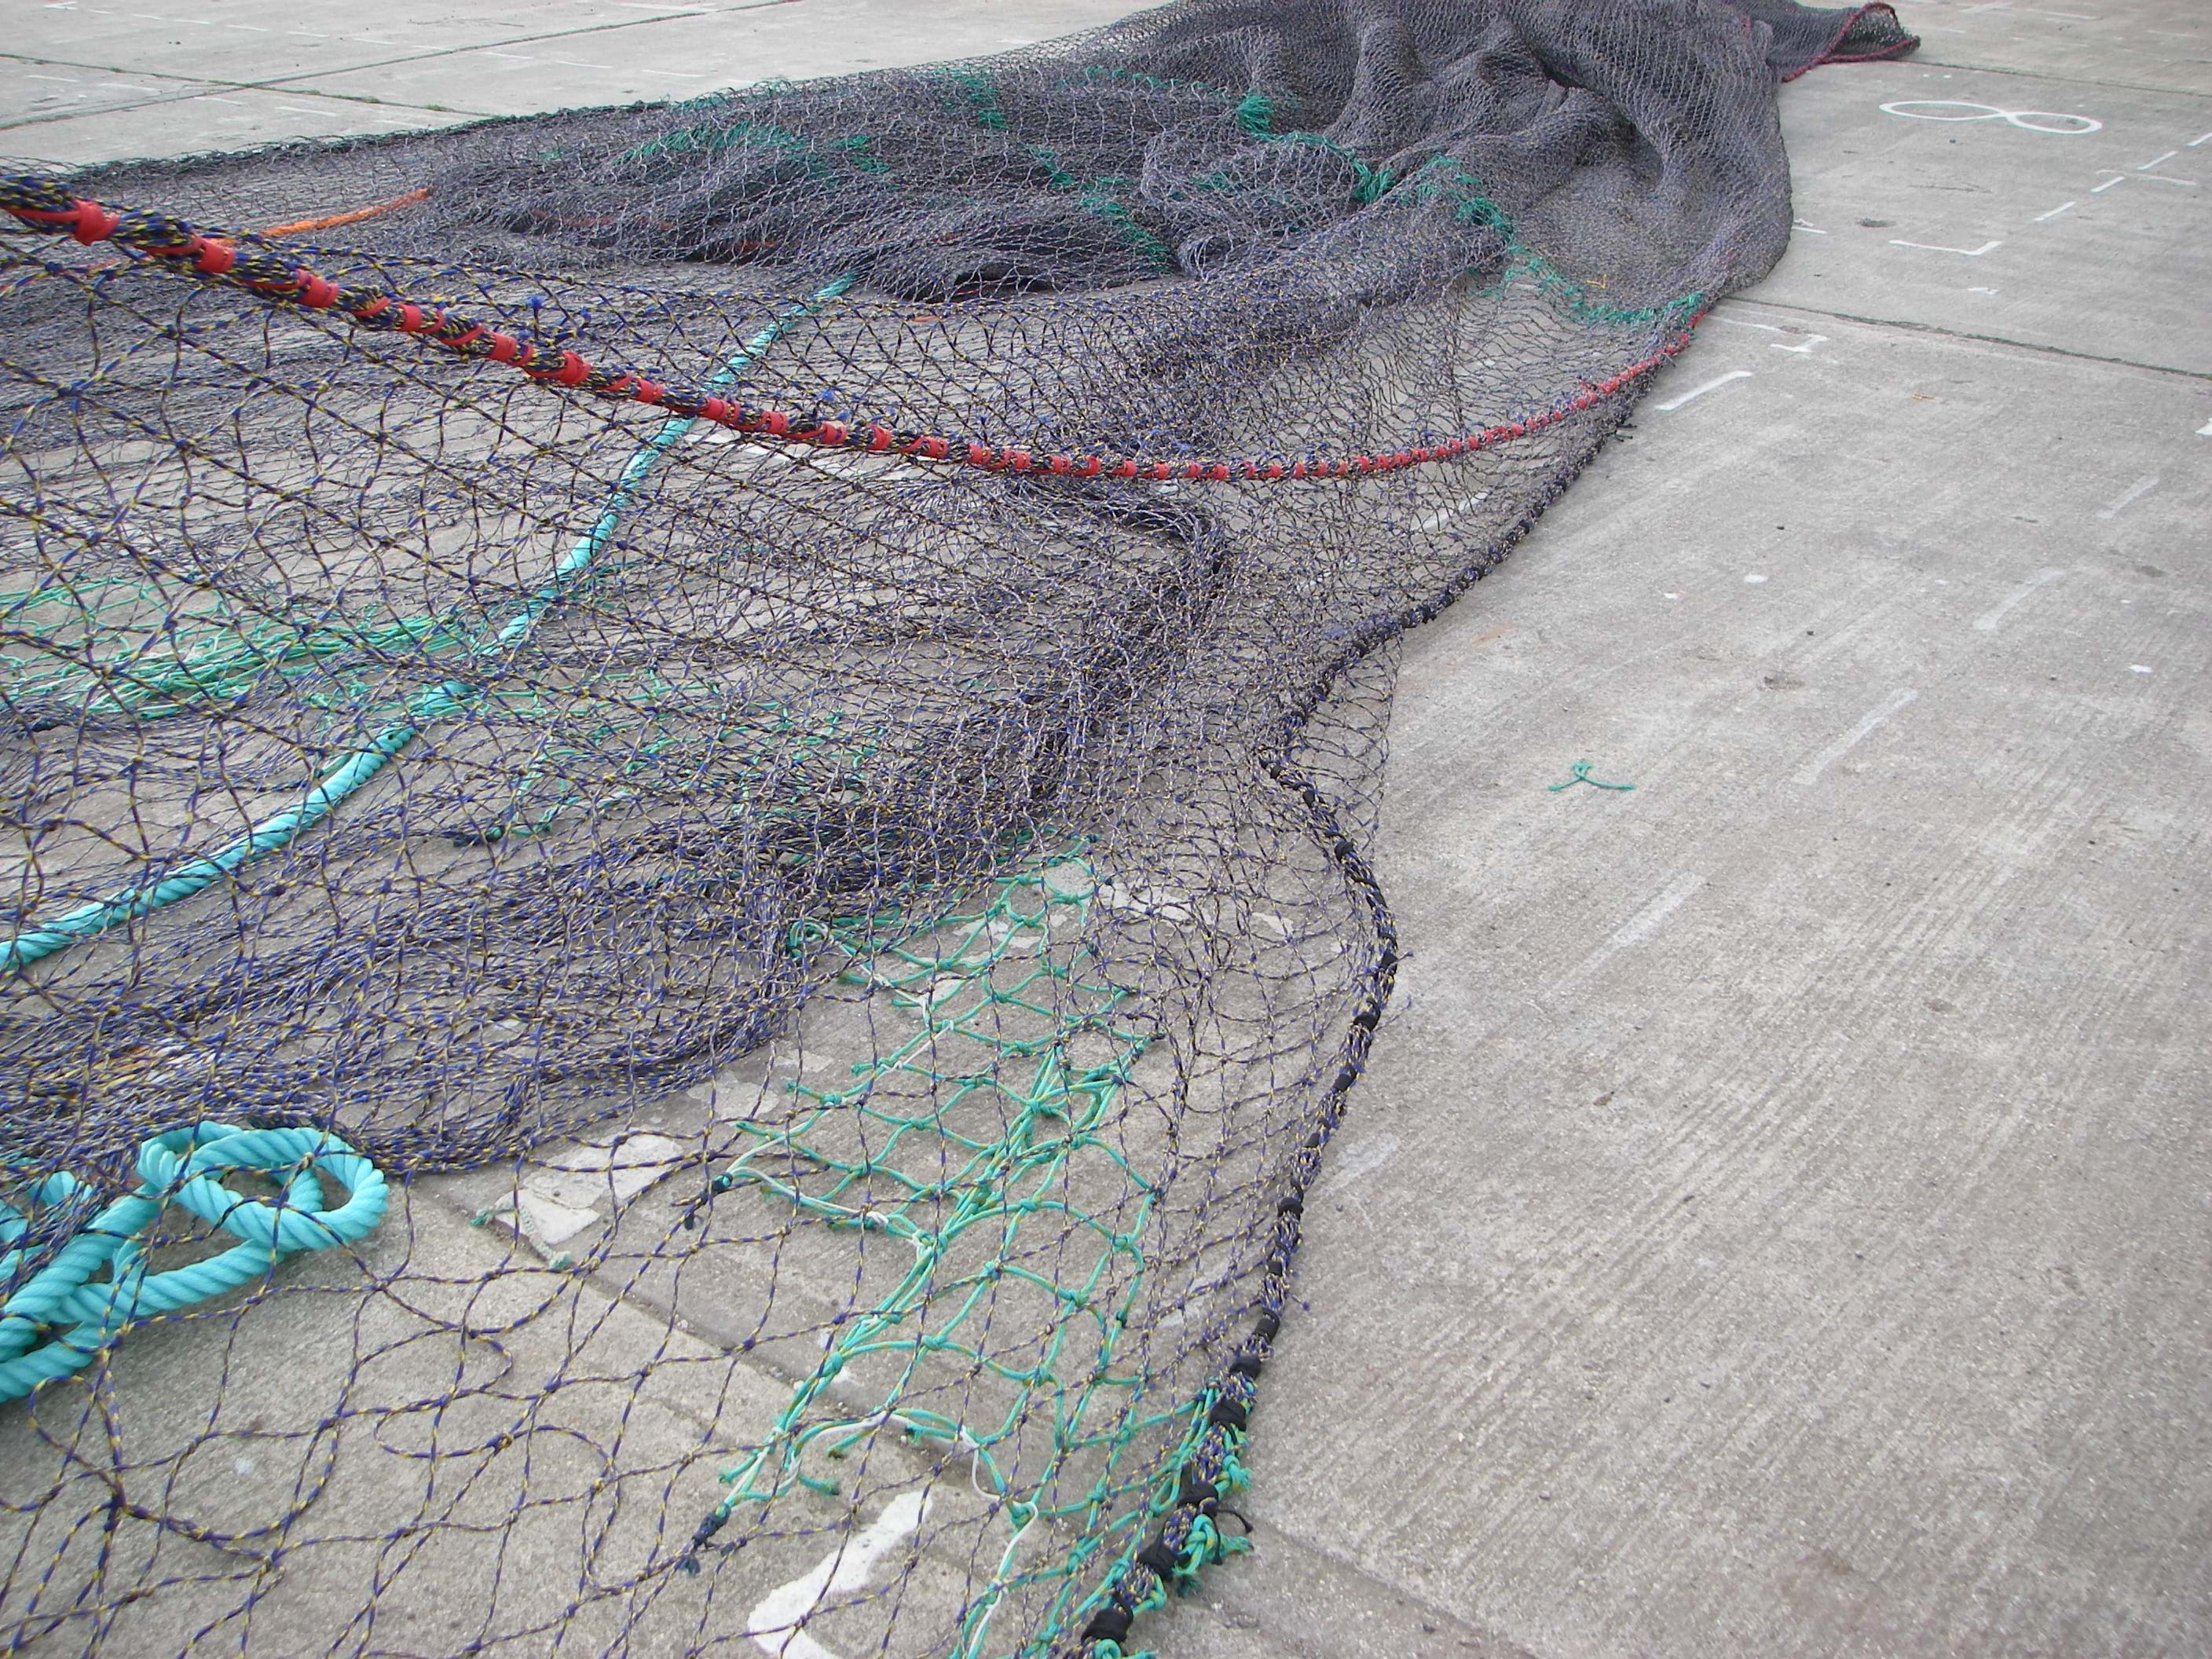 Netting held in mid-air to show the diamond mesh